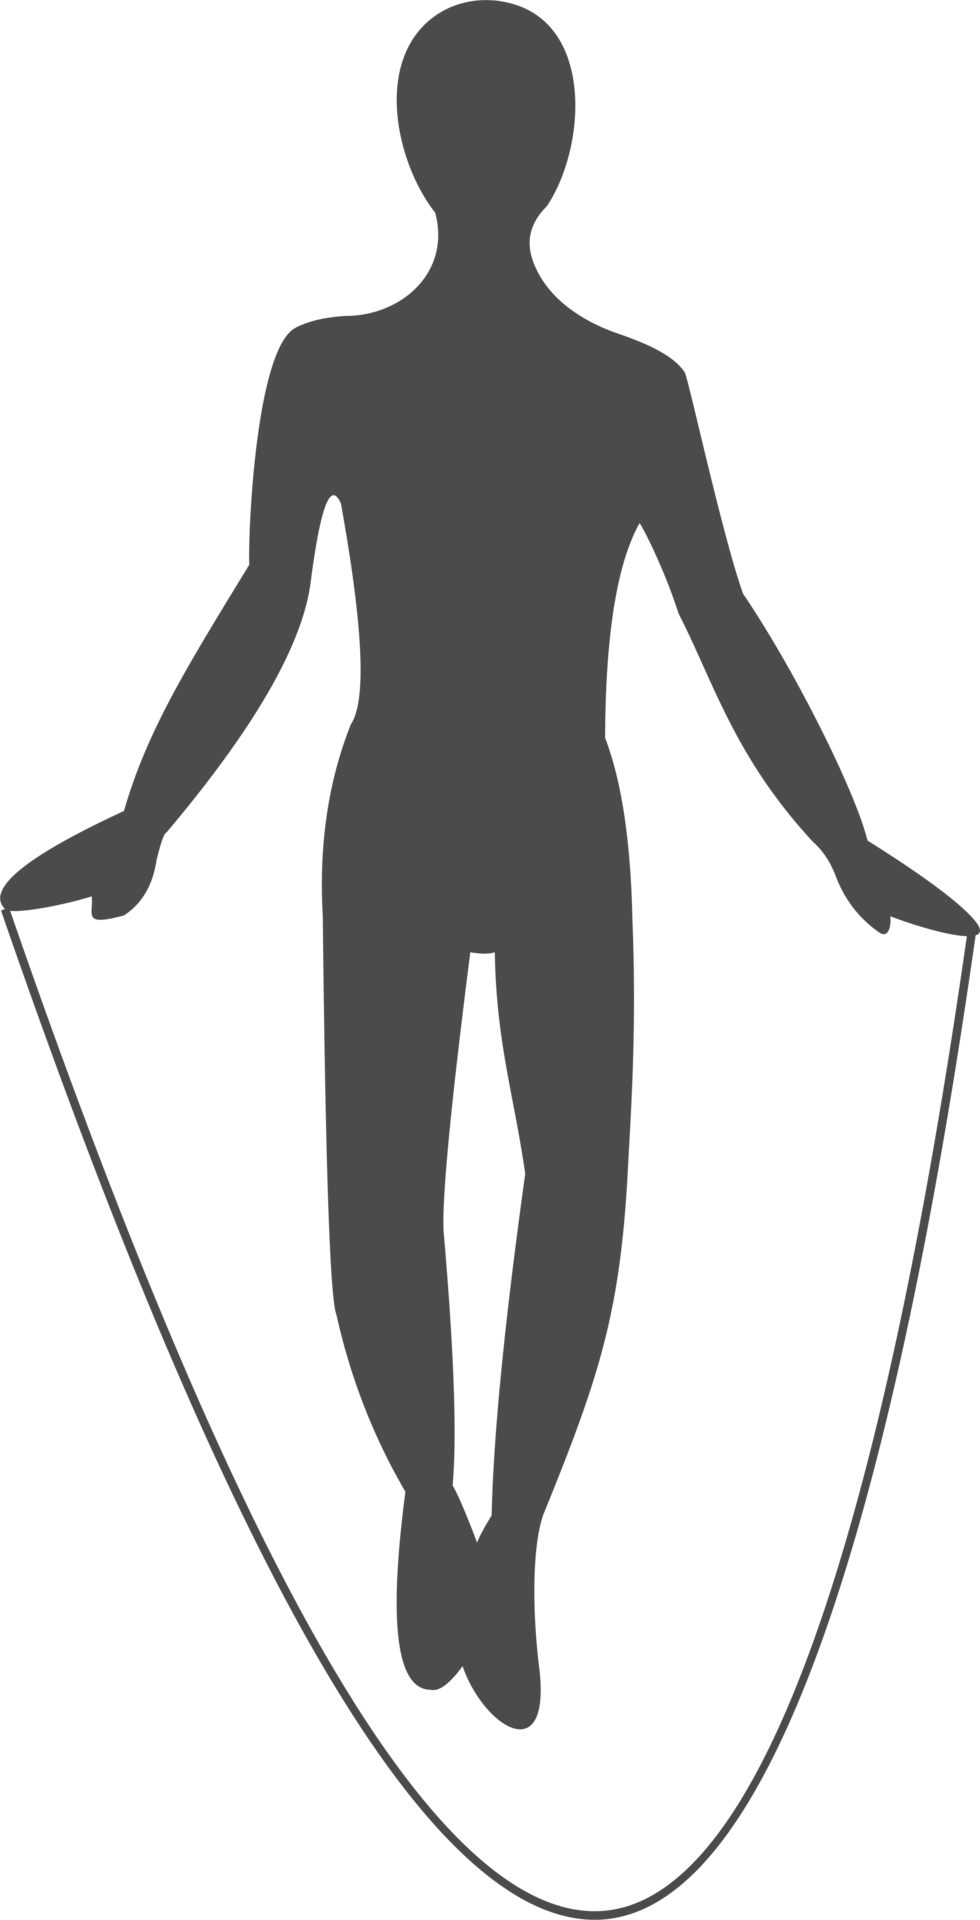 The woman jumping rope icon PNG 22111835 PNG